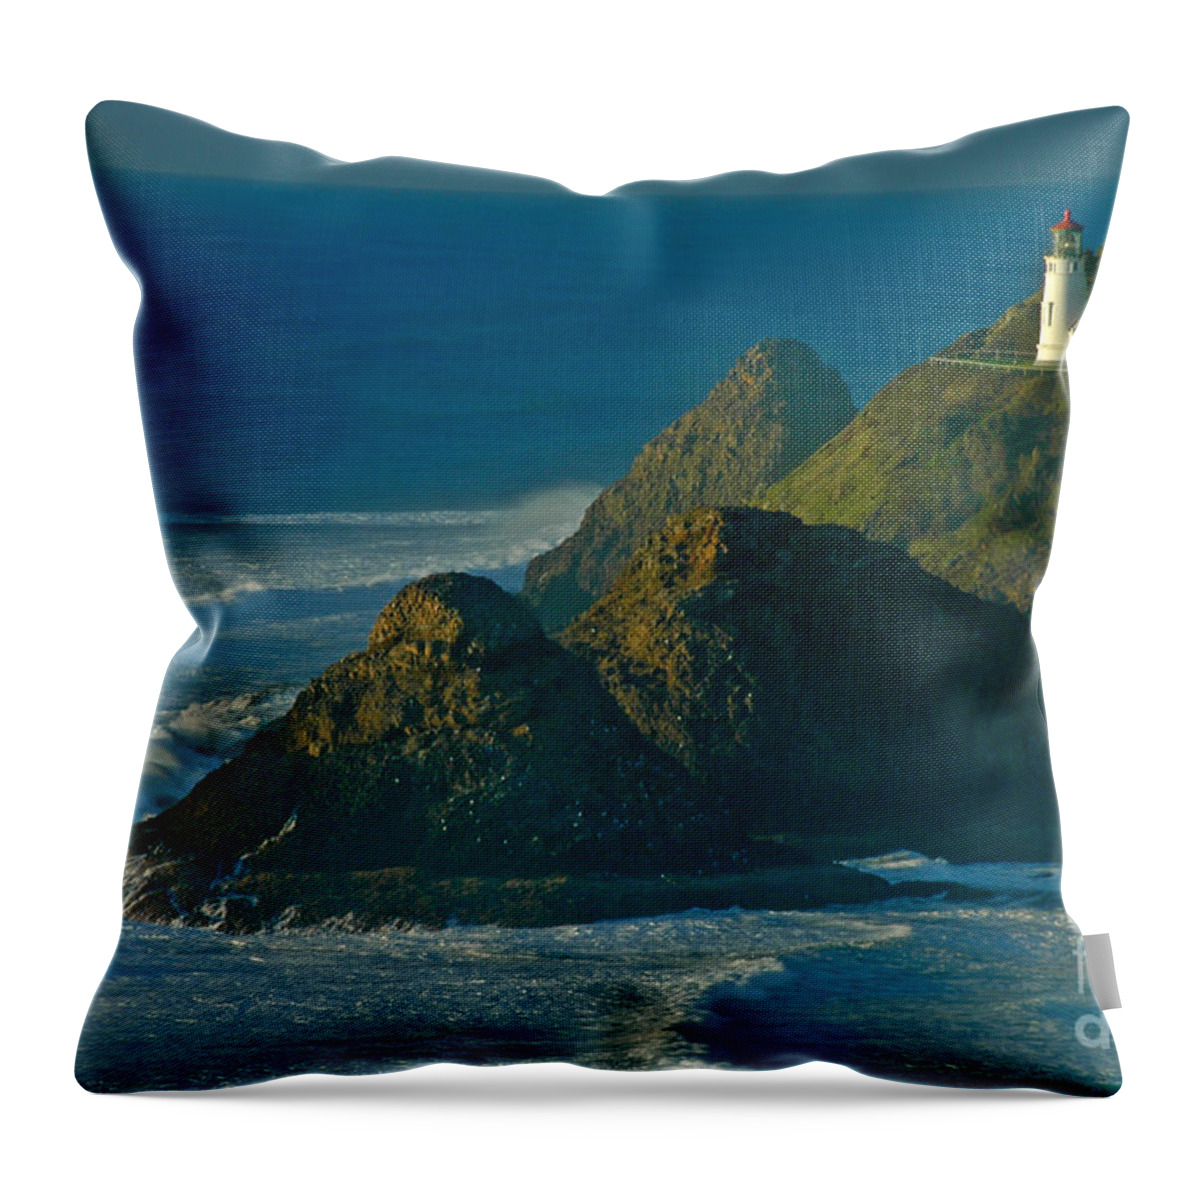 Pacific Throw Pillow featuring the photograph Heceta Head Seascape by Nick Boren